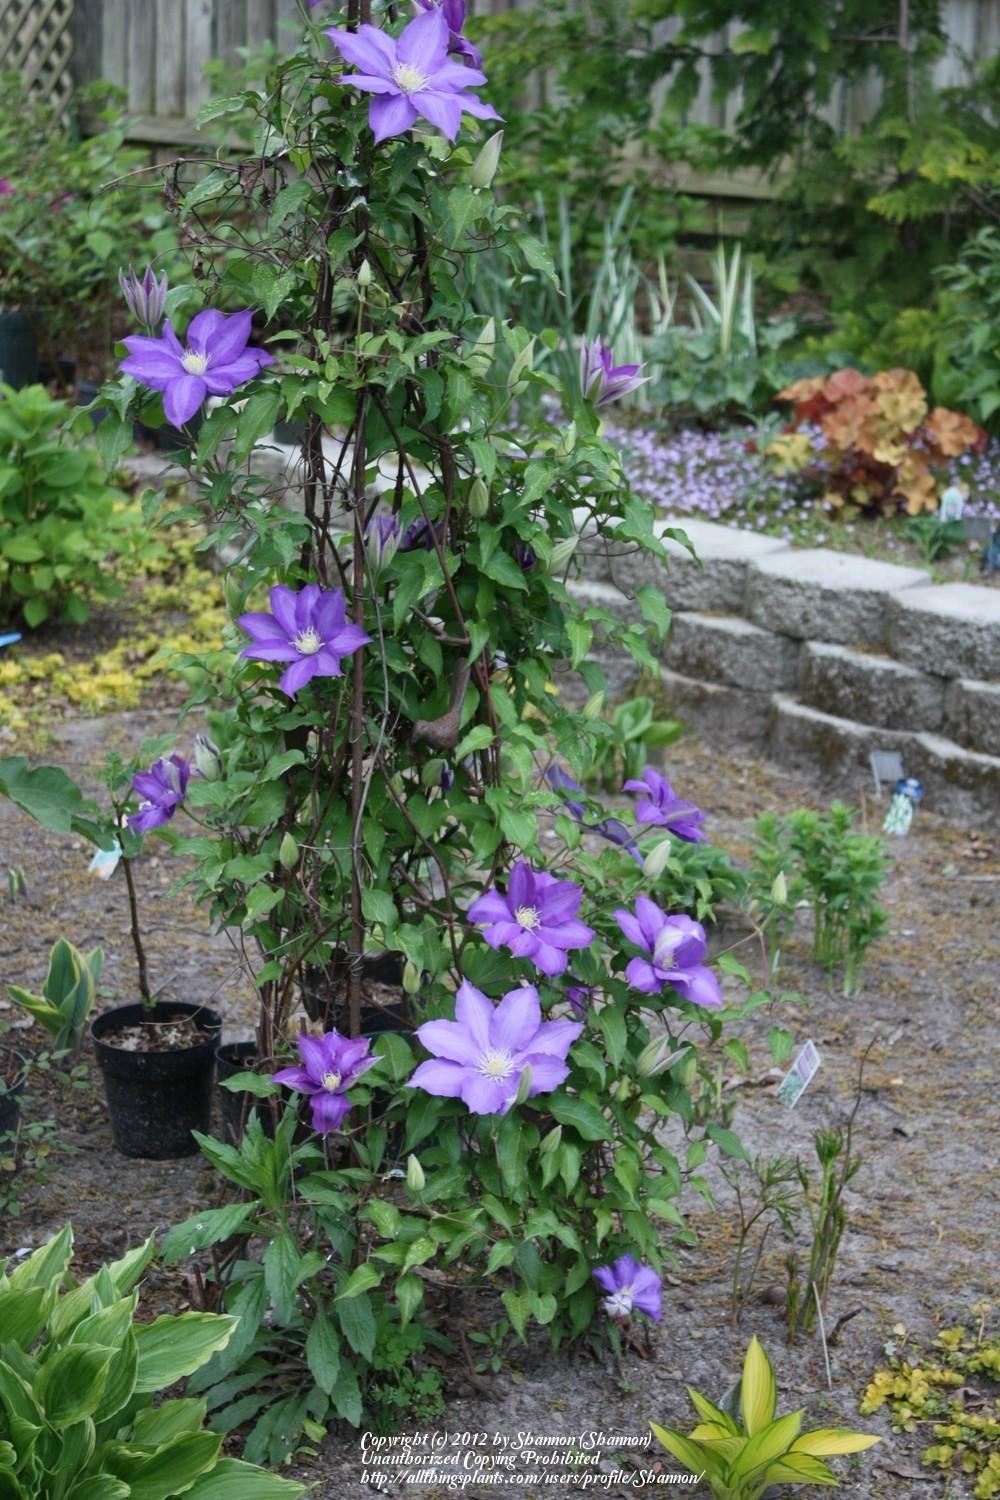 Photo of Clematis uploaded by Shannon